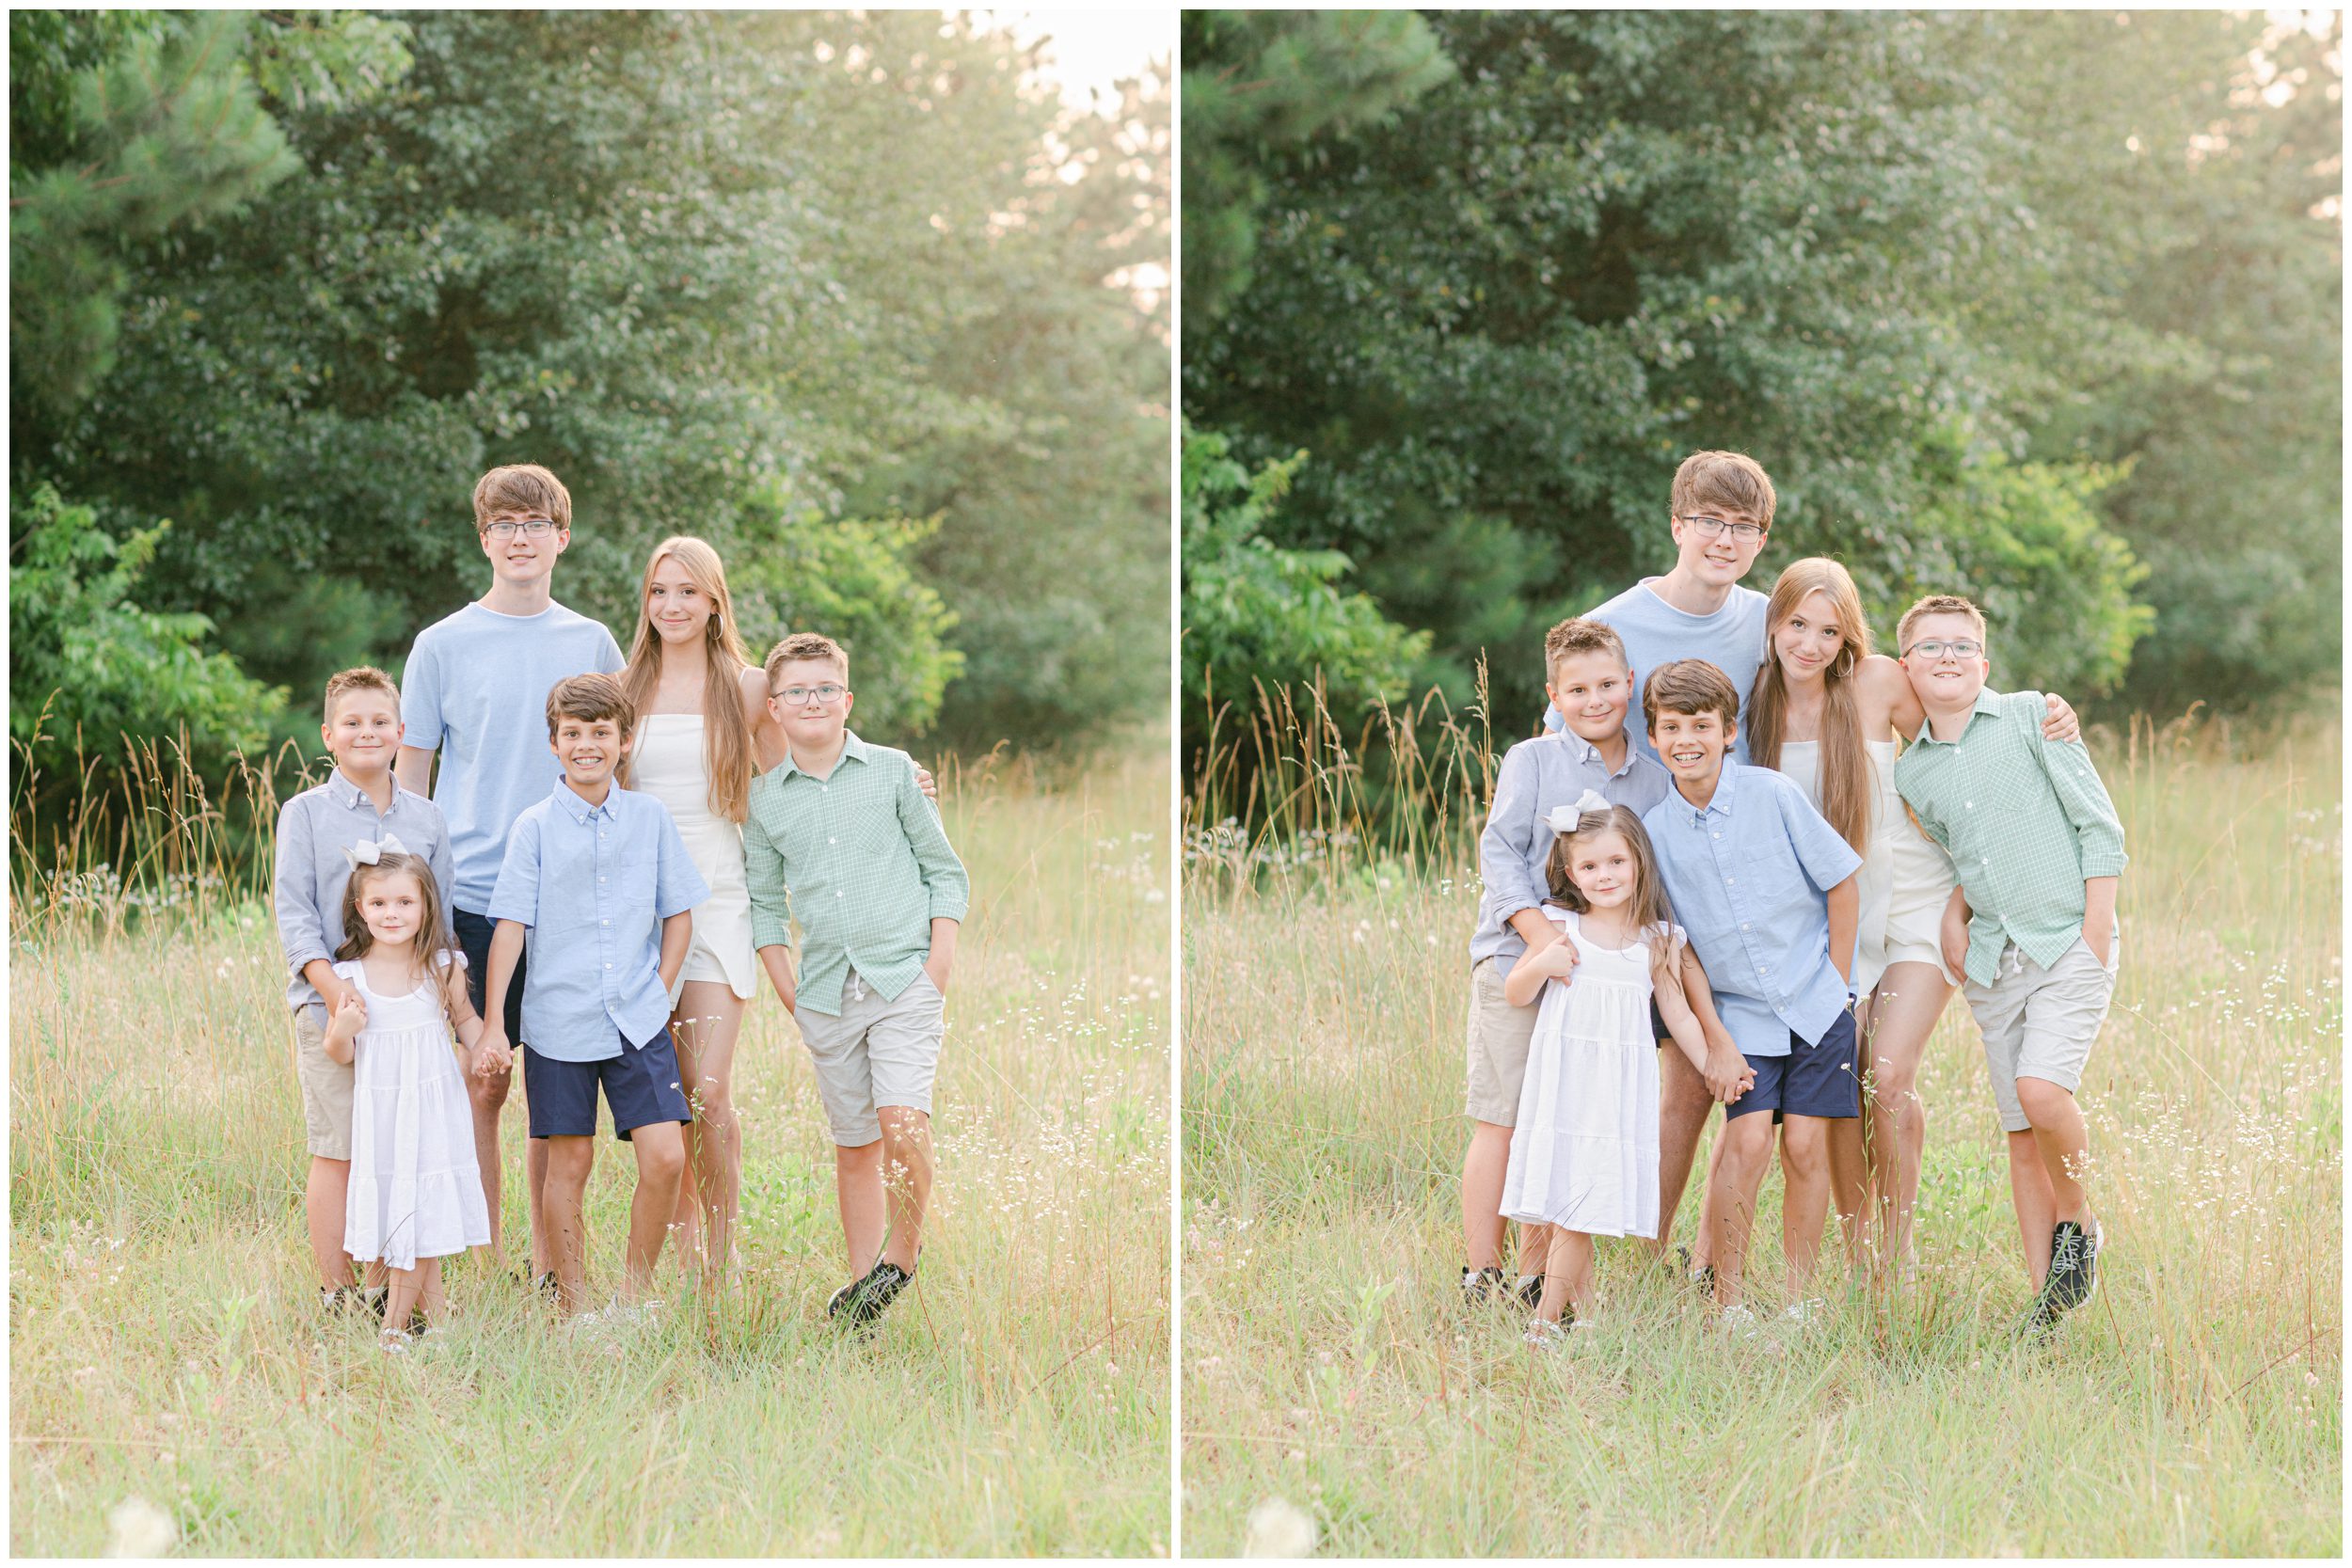 Extended family photographer photos of cousins in field in Oconee County, Georgia.